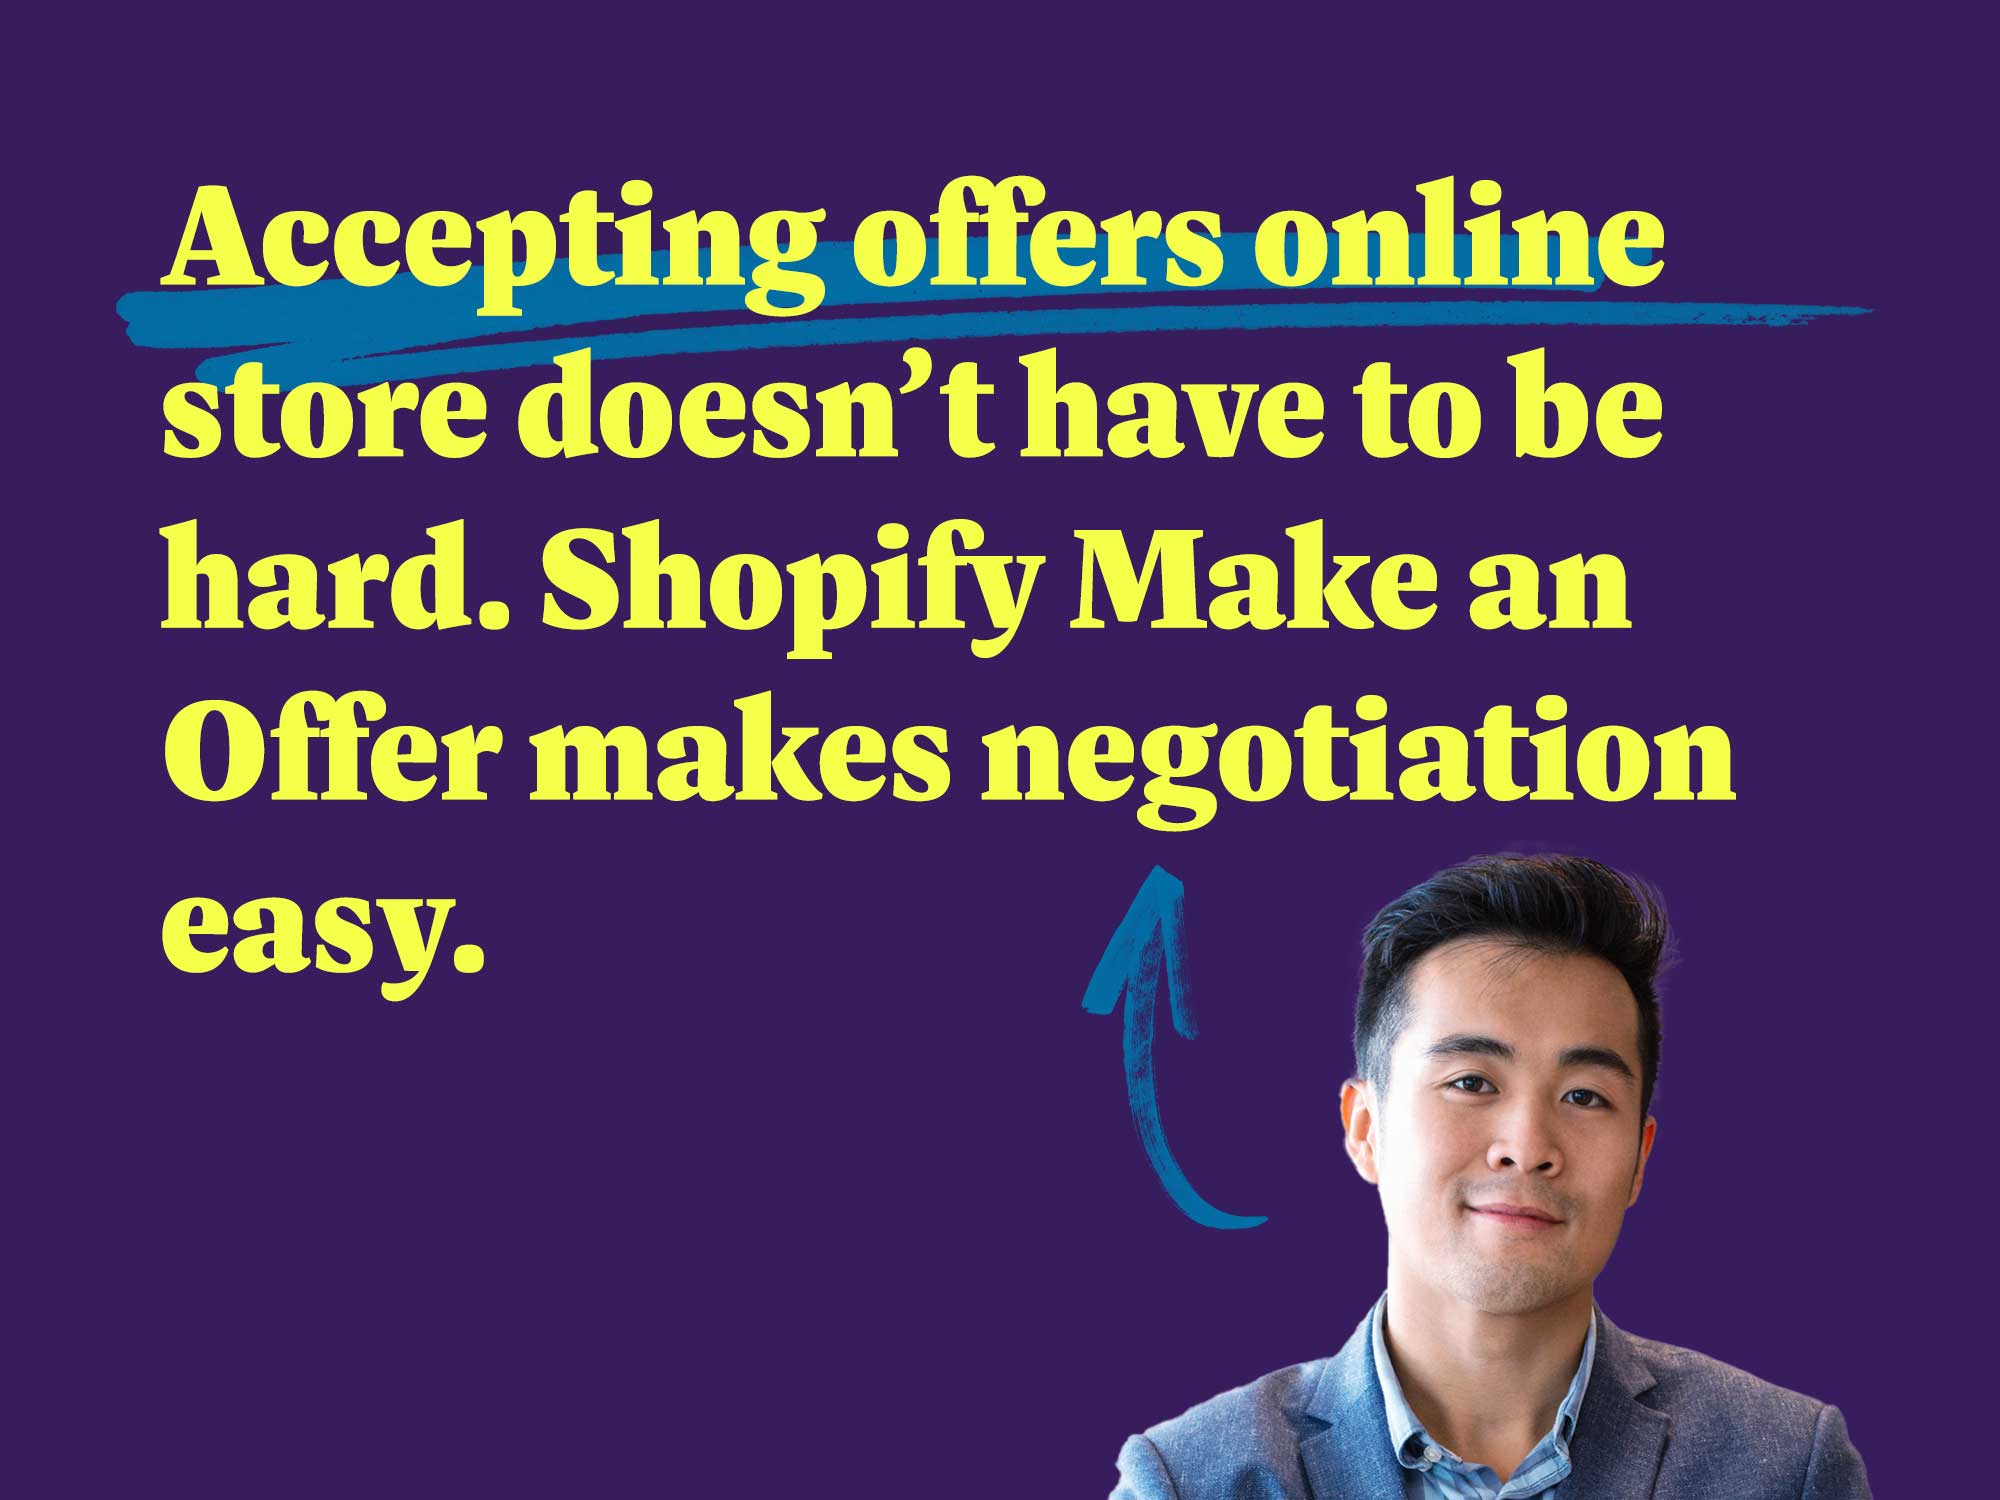 Accepting offers online store doesn’t have to be hard. Shopify Make an Offer makes negotiation easy.